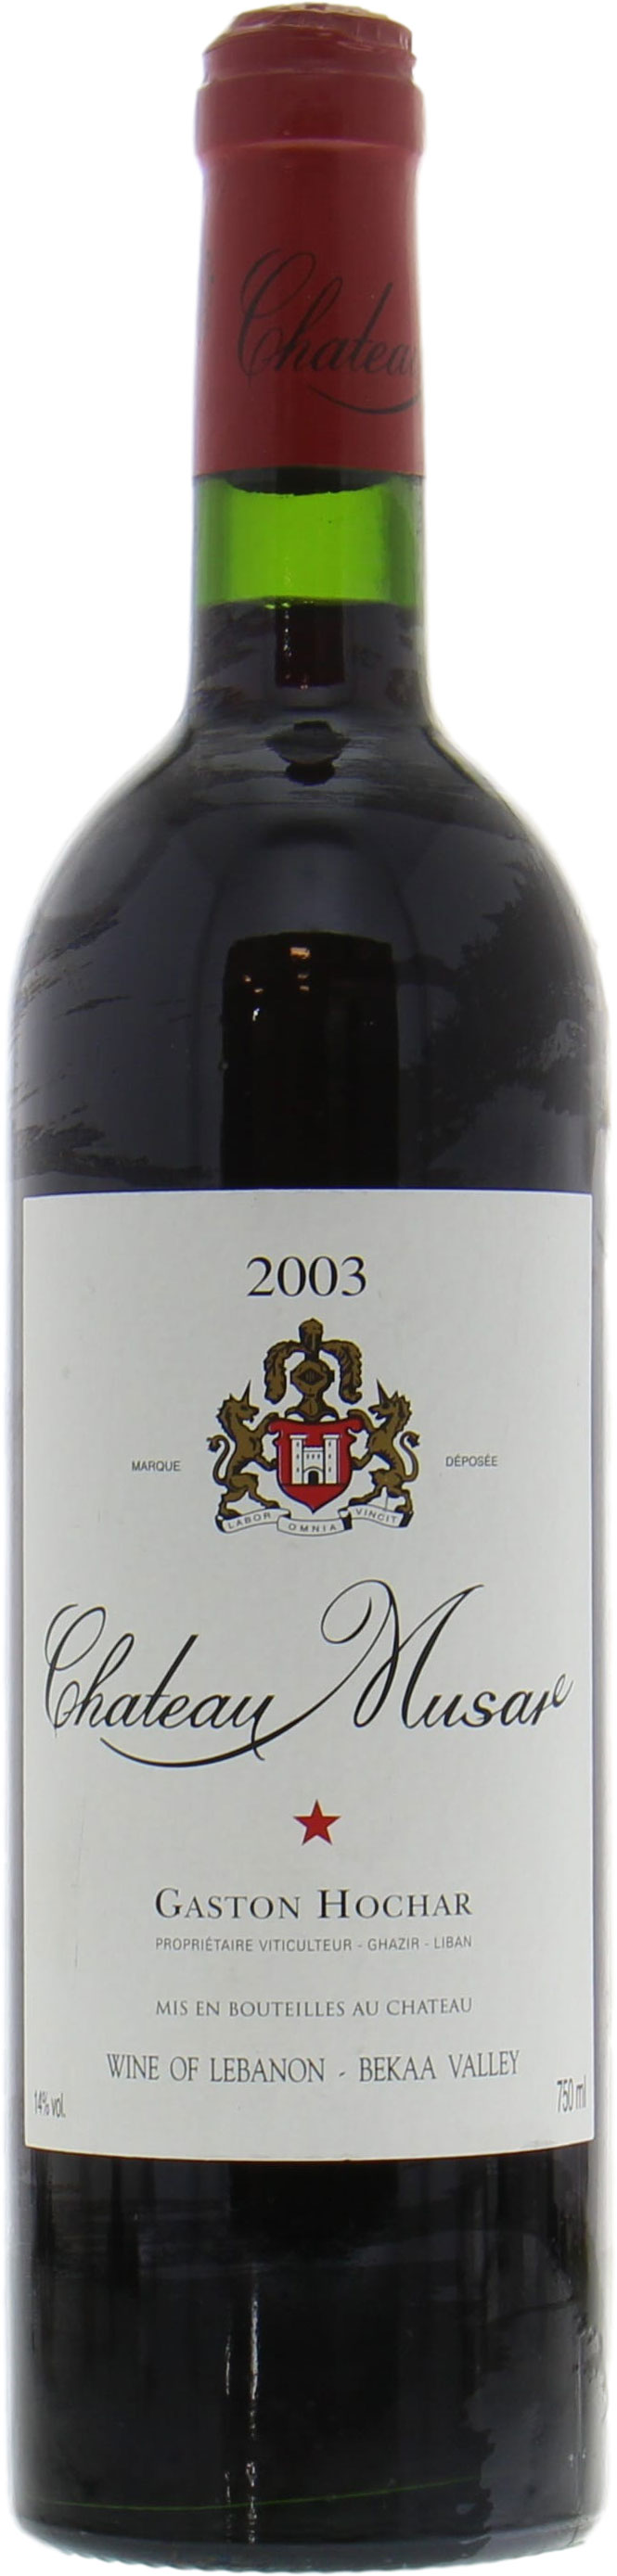 Chateau Musar - Chateau Musar release 2021 2003